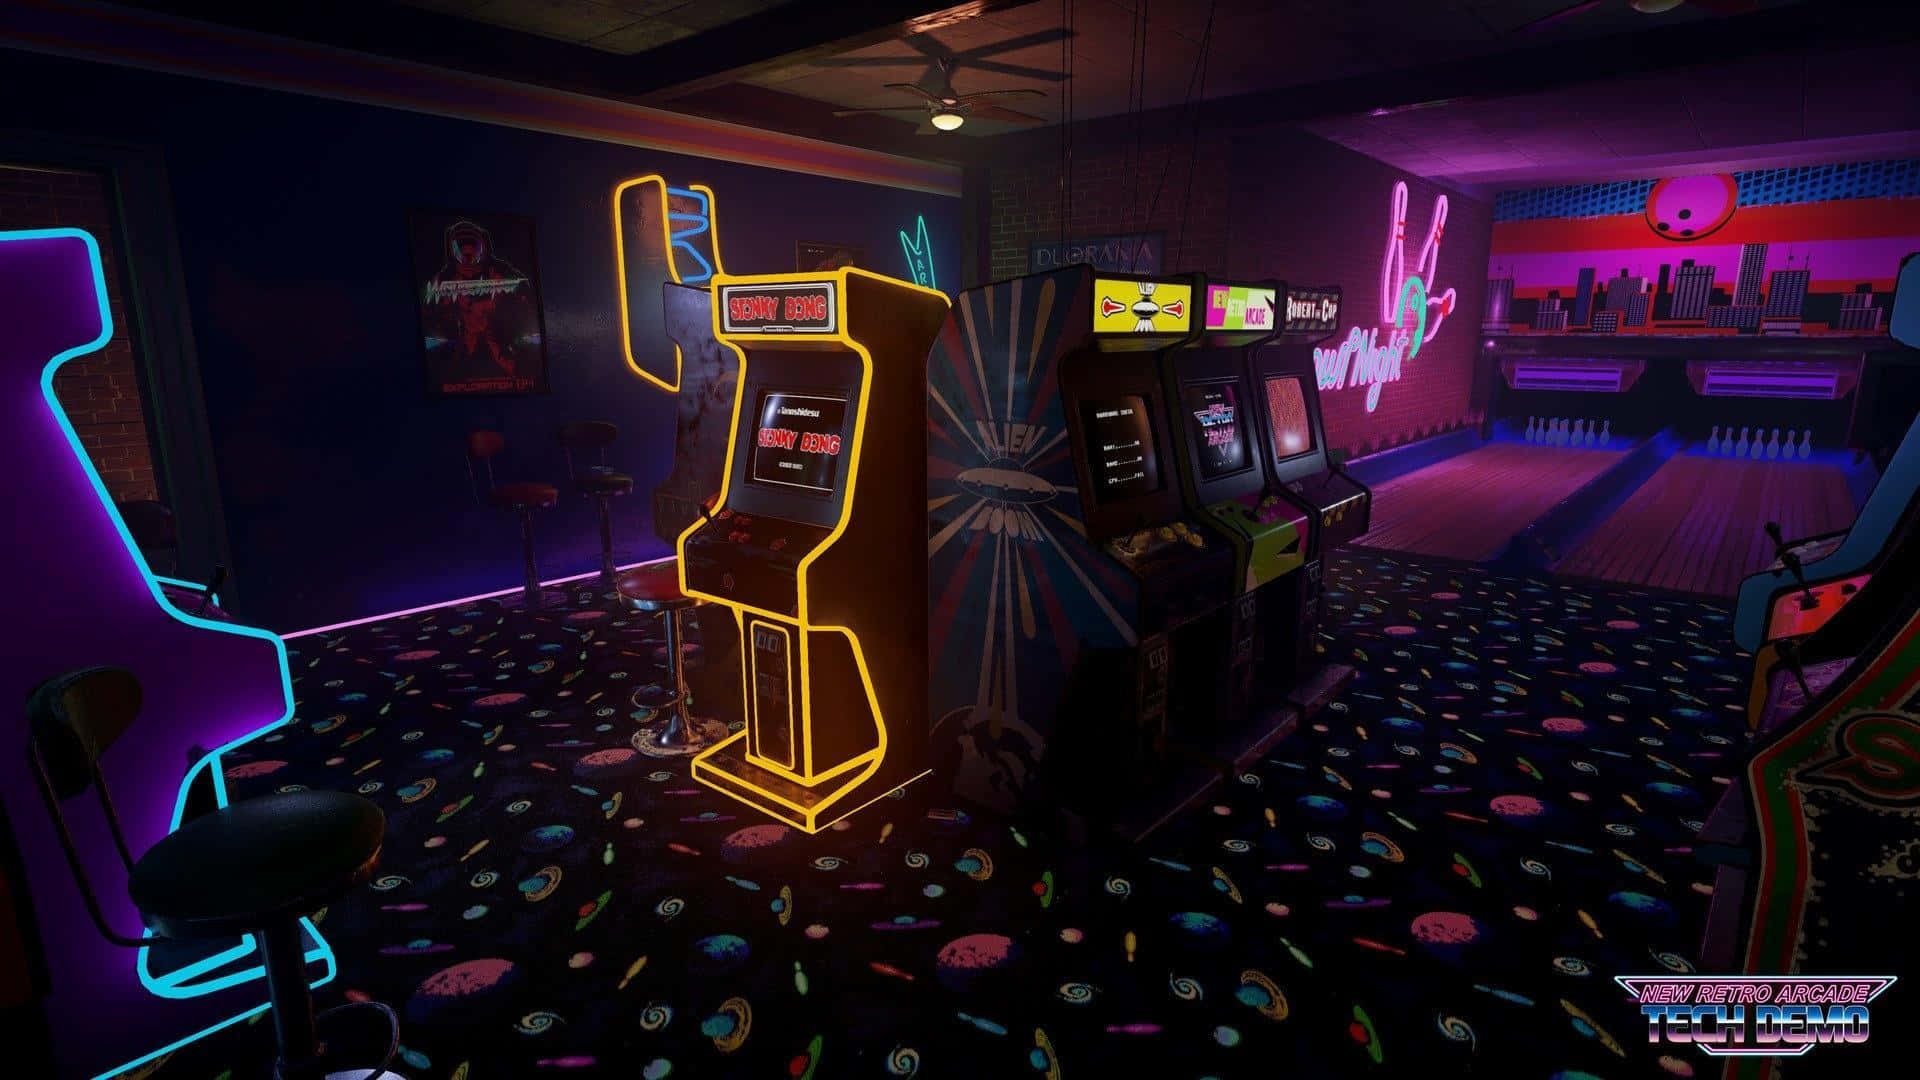 Download Keep the retro vibes alive with arcade aesthetic Wallpaper